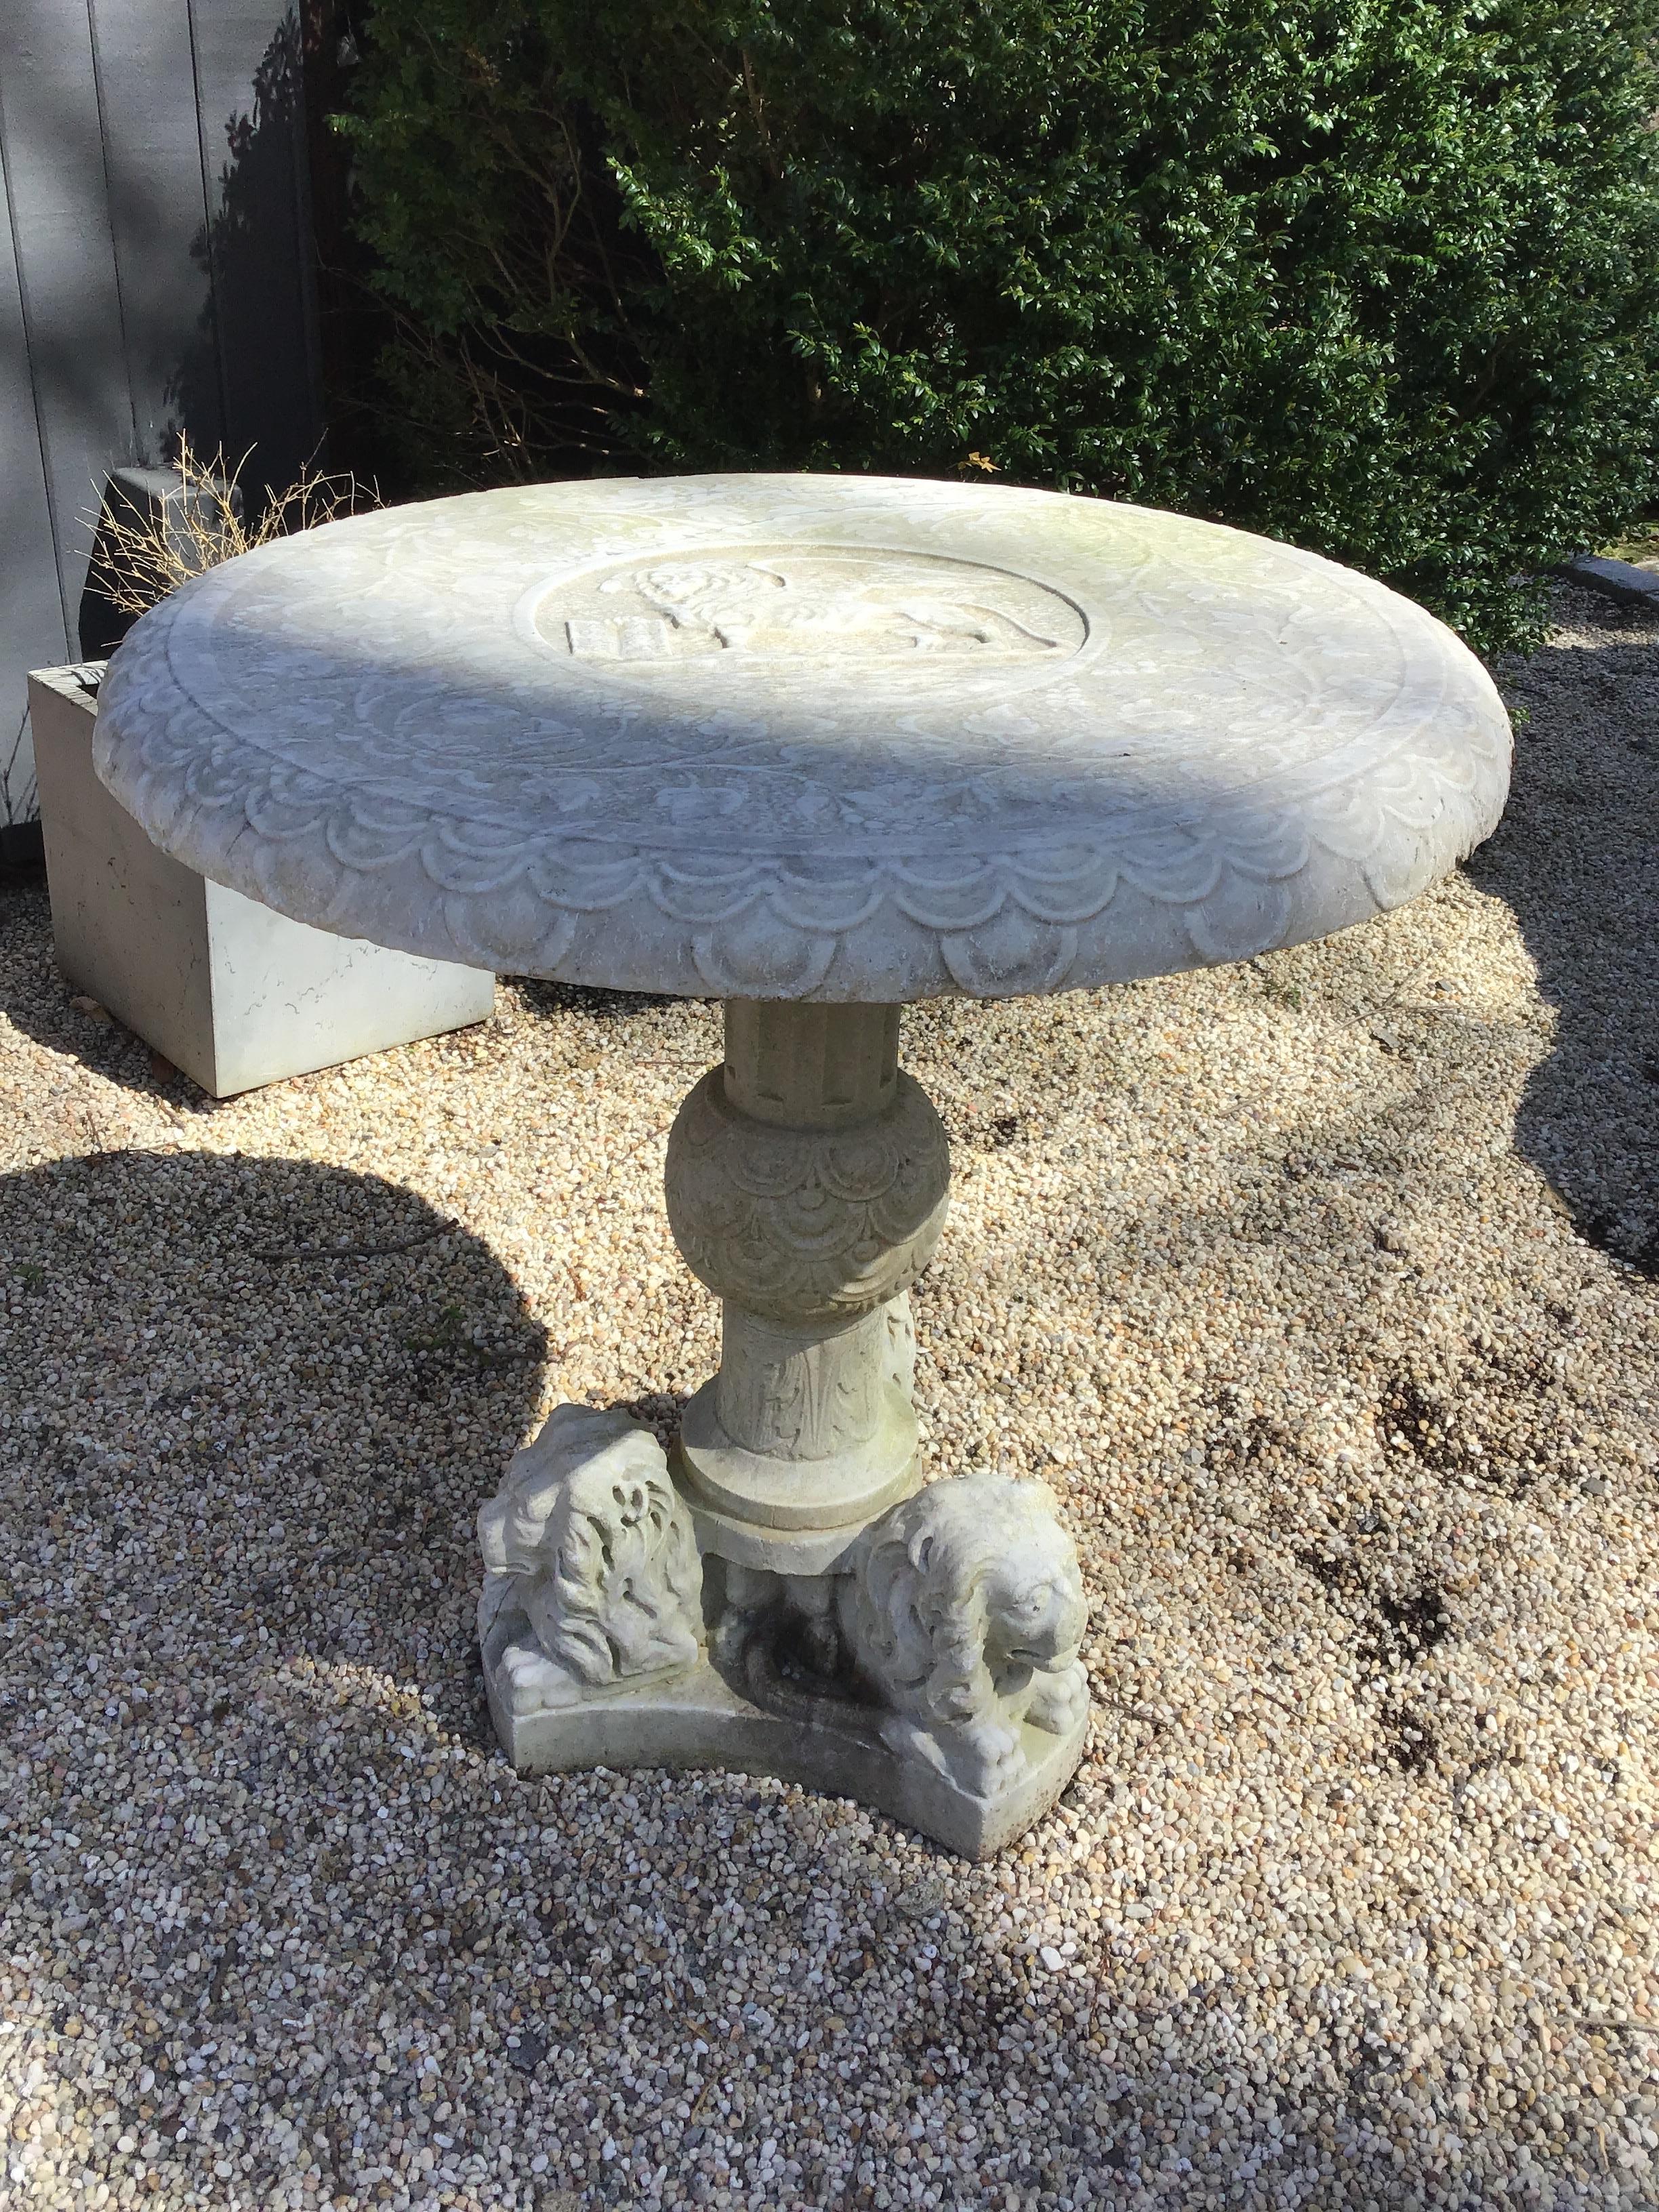 1960s carved marble lion table. Top has a griffin carved in it. Base has 3 lions on the bottom. Great for inside or out. I’m truly guessing at the age of this table, it could be older.